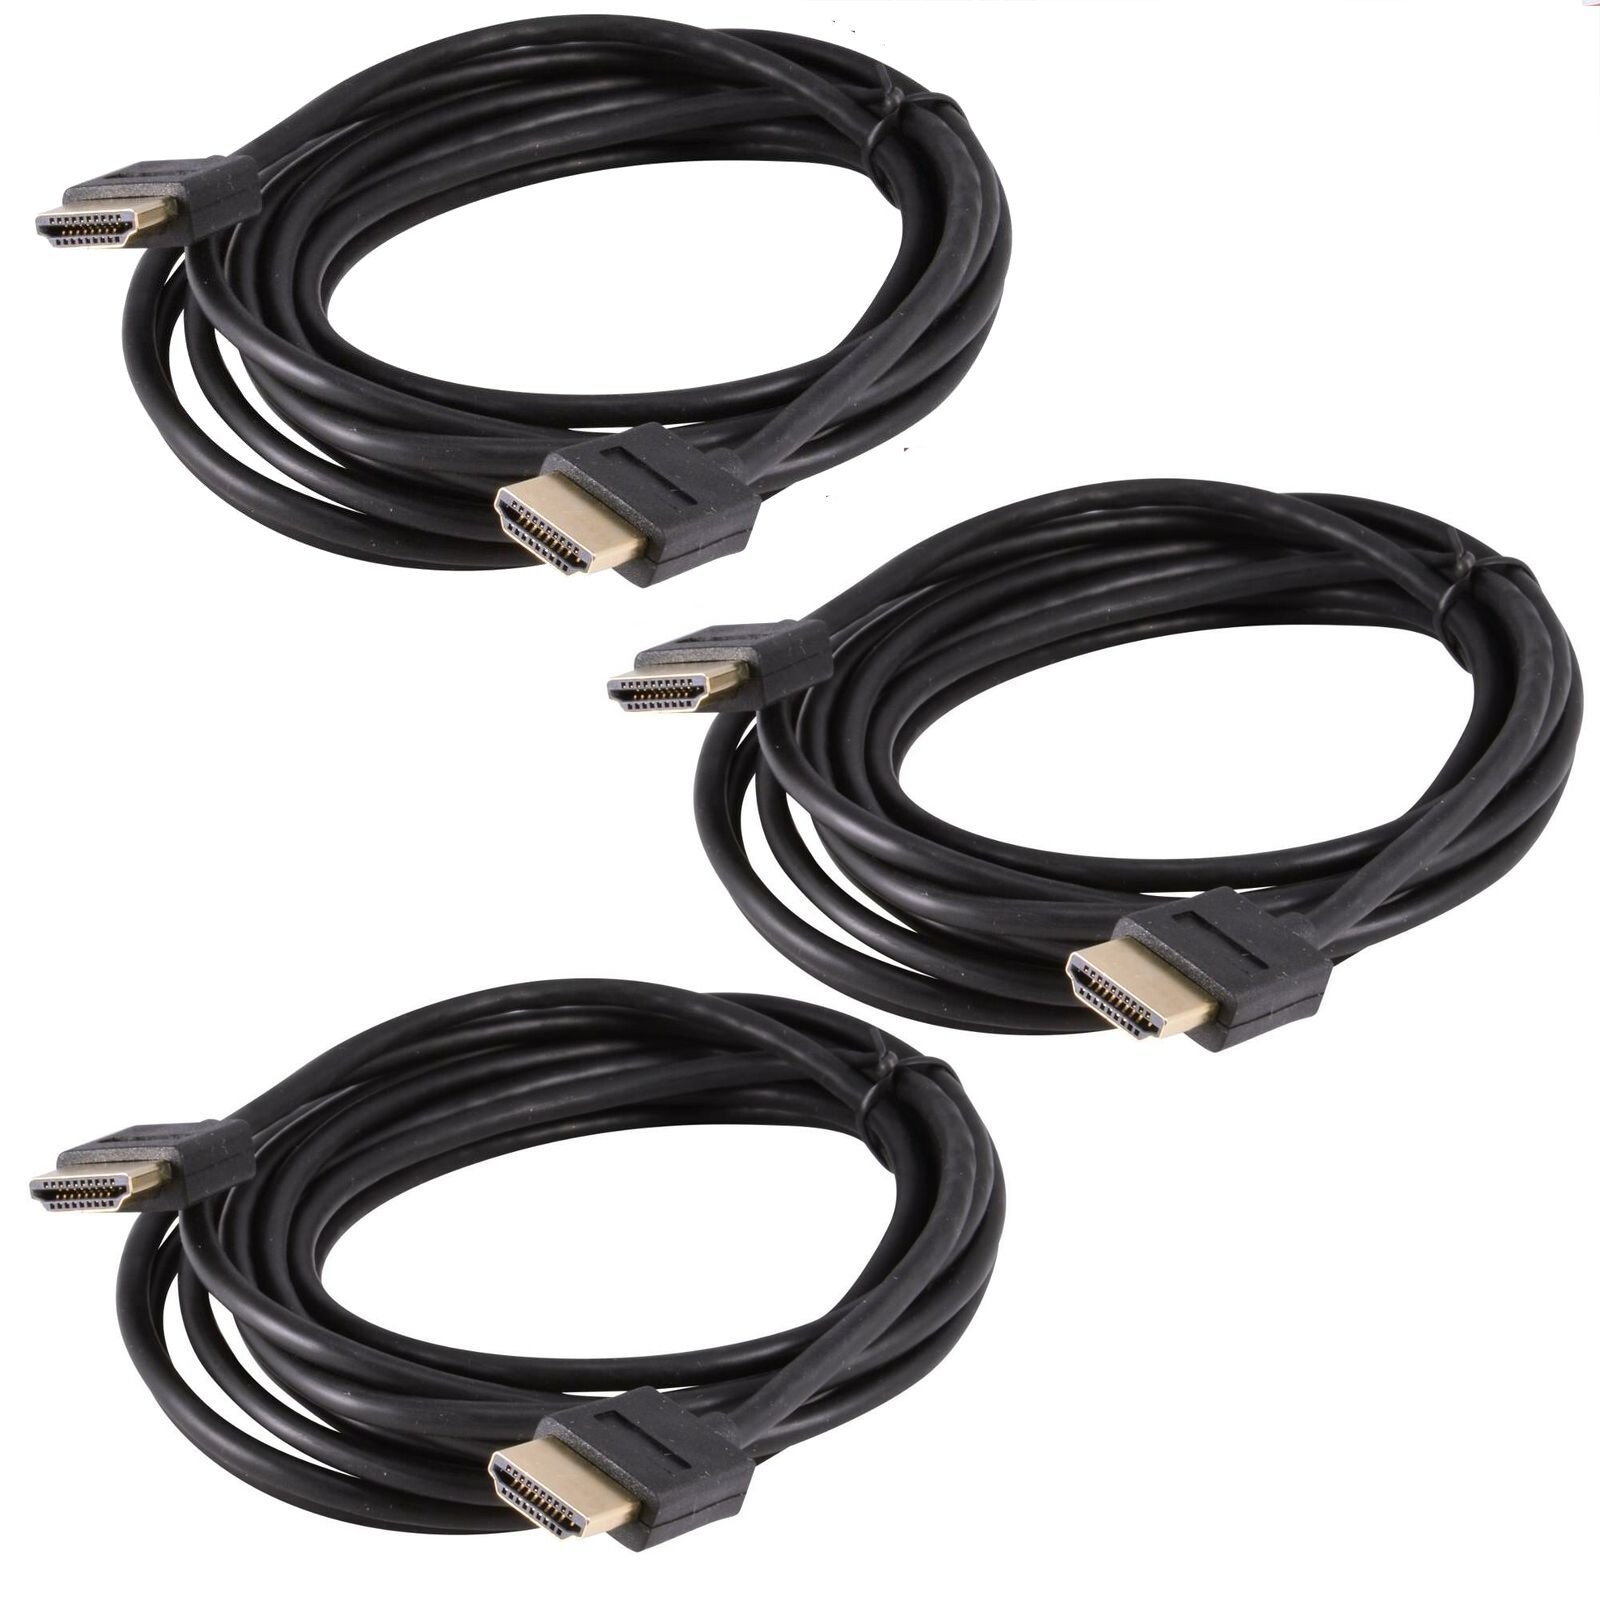 HDMI Cable with Ethernet [2-Pack]